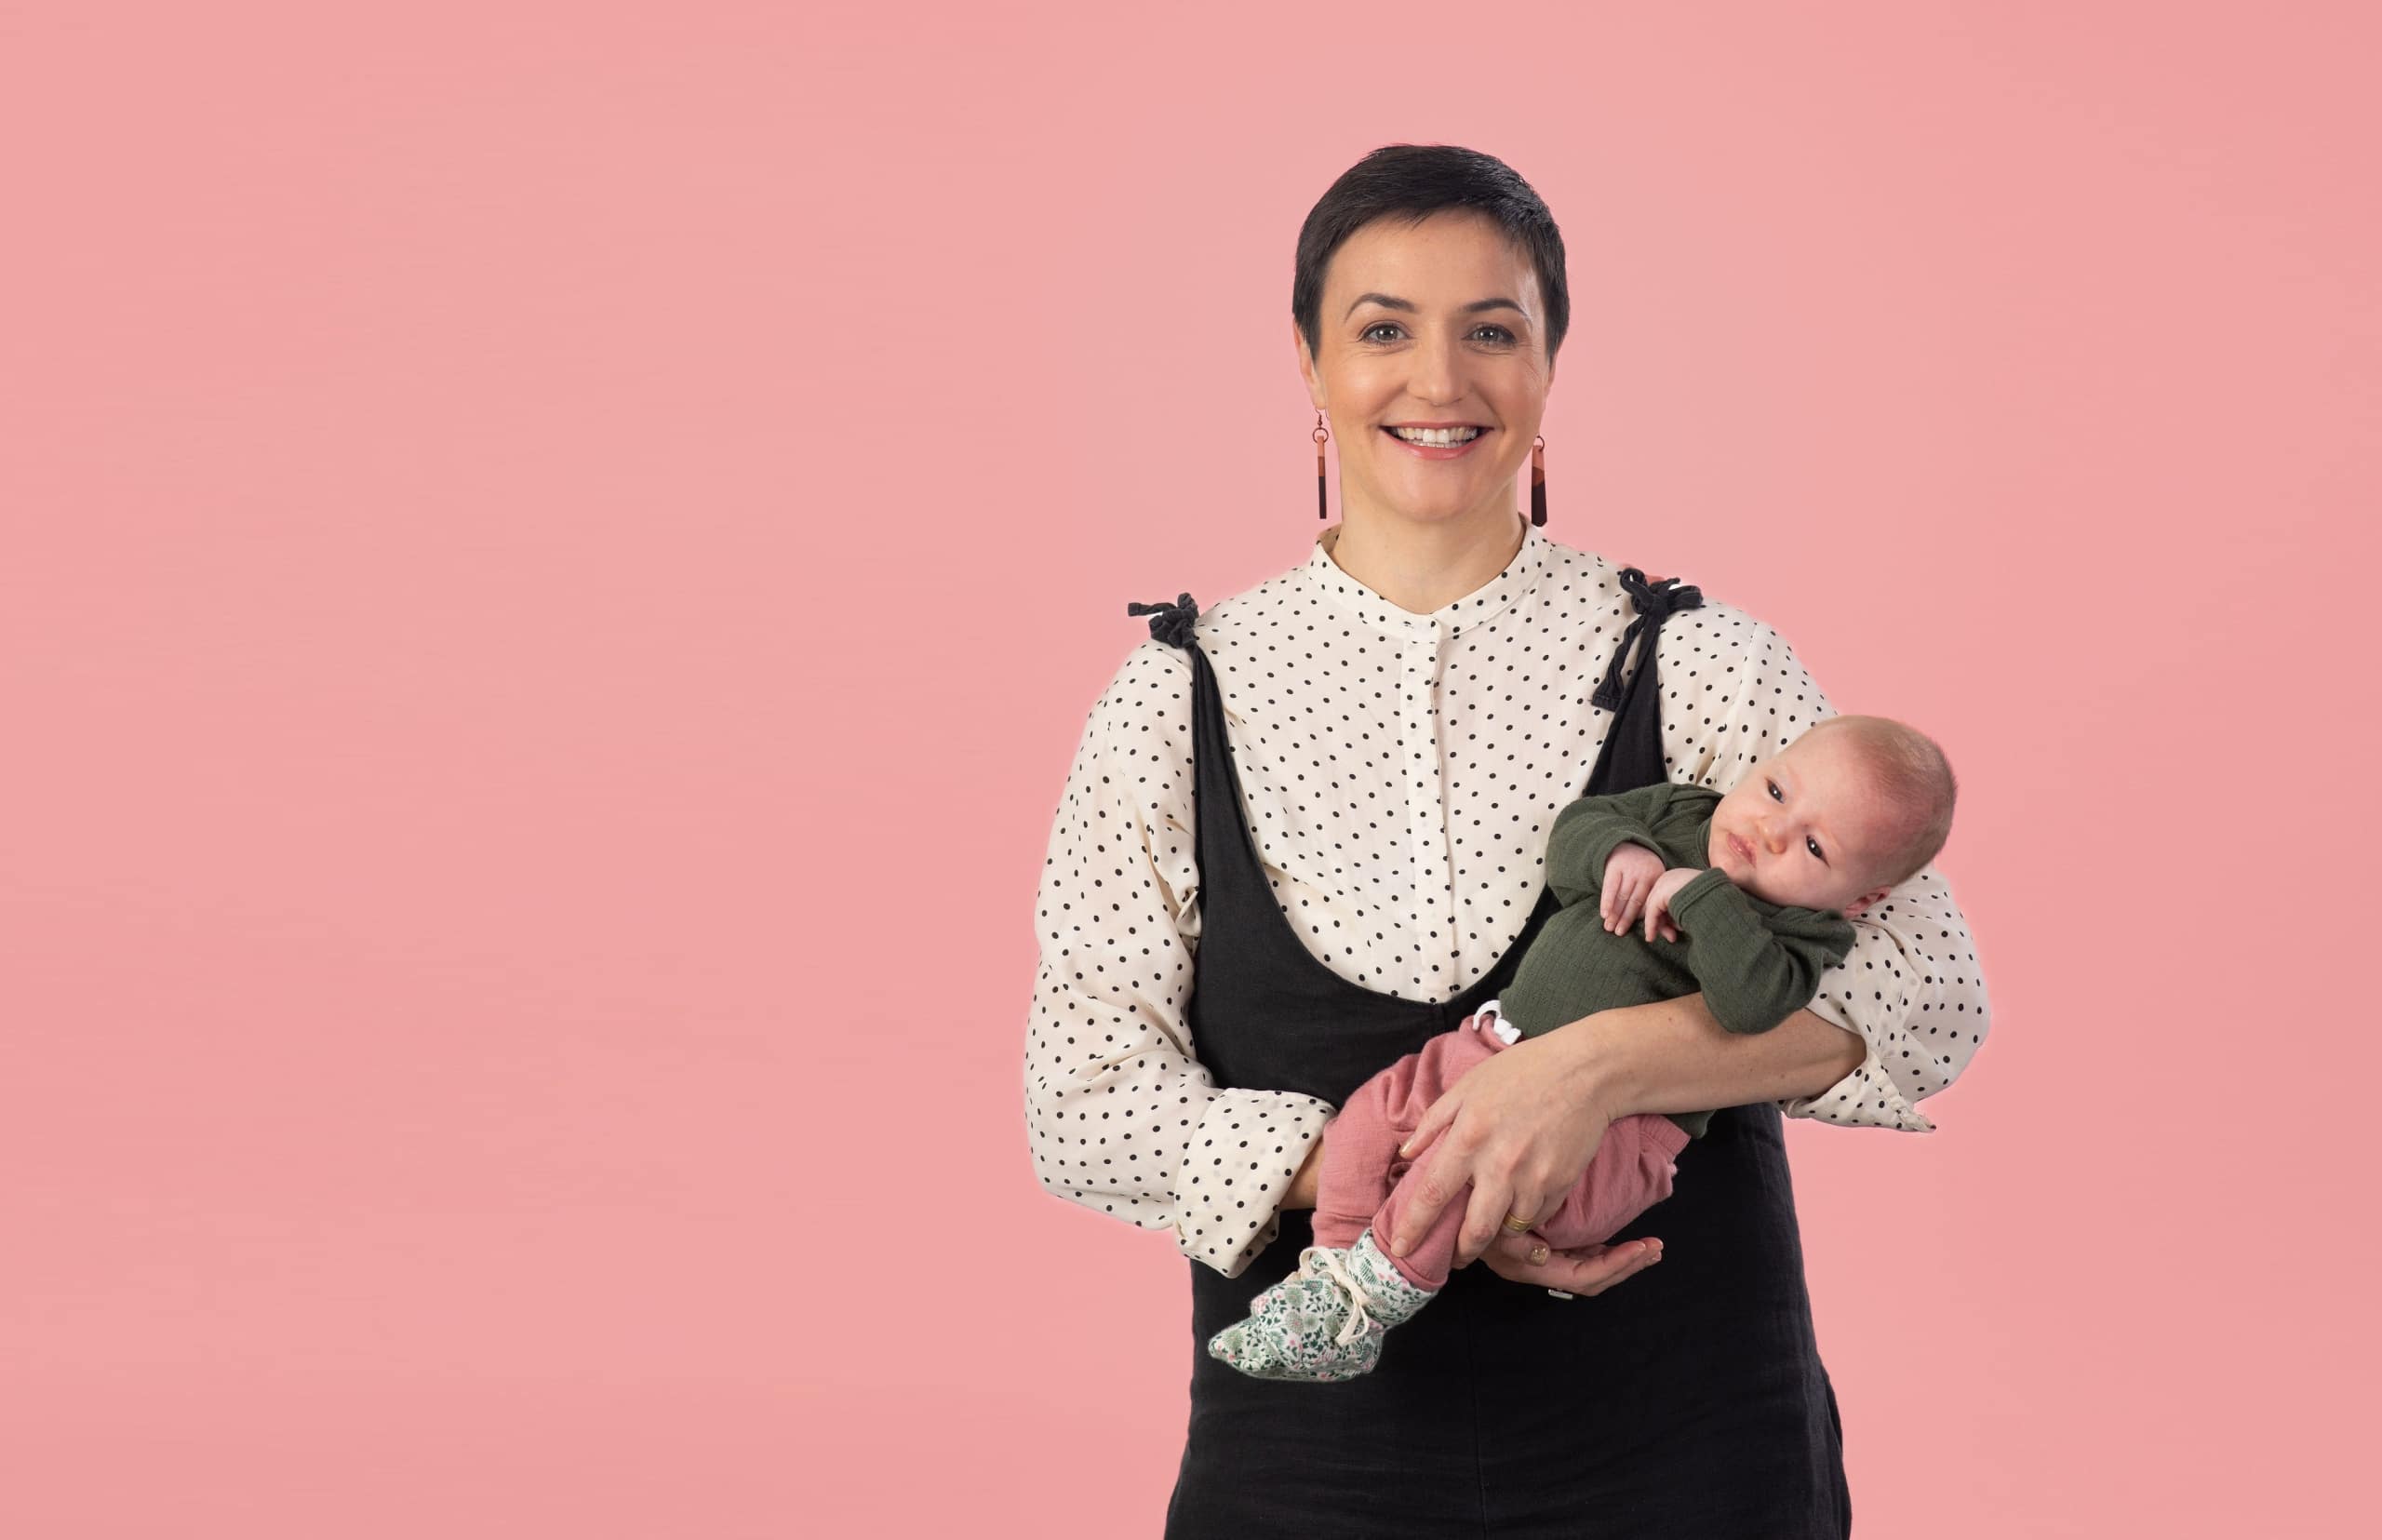 Portrait of Māori Fellow Dr Sarah Te Whaiti and her baby daughter against a pink background.